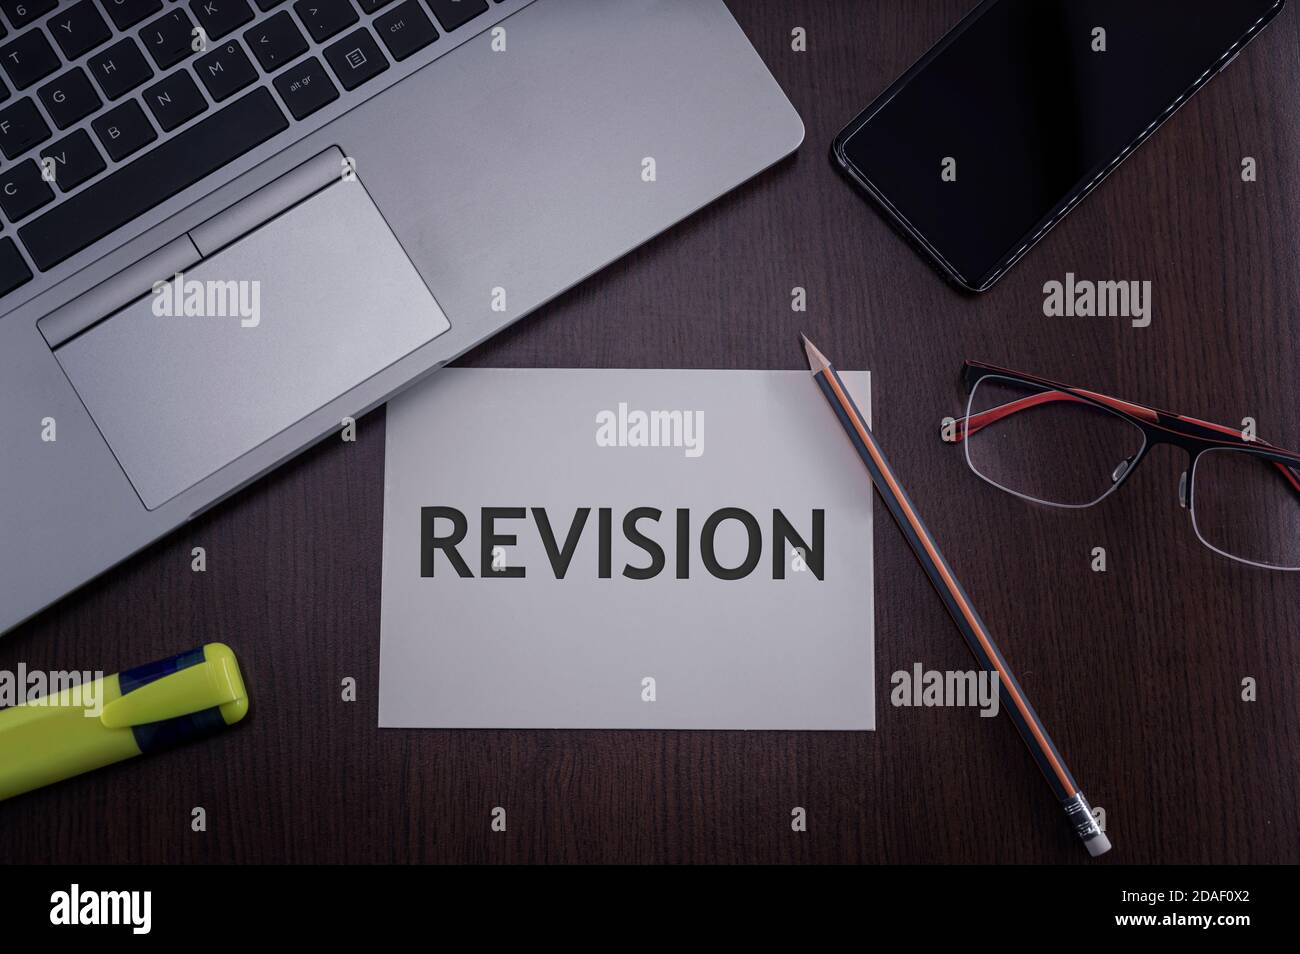 Top view of laptop, phone, glasses and pencil with card with inscription revision. Business concept. Stock Photo